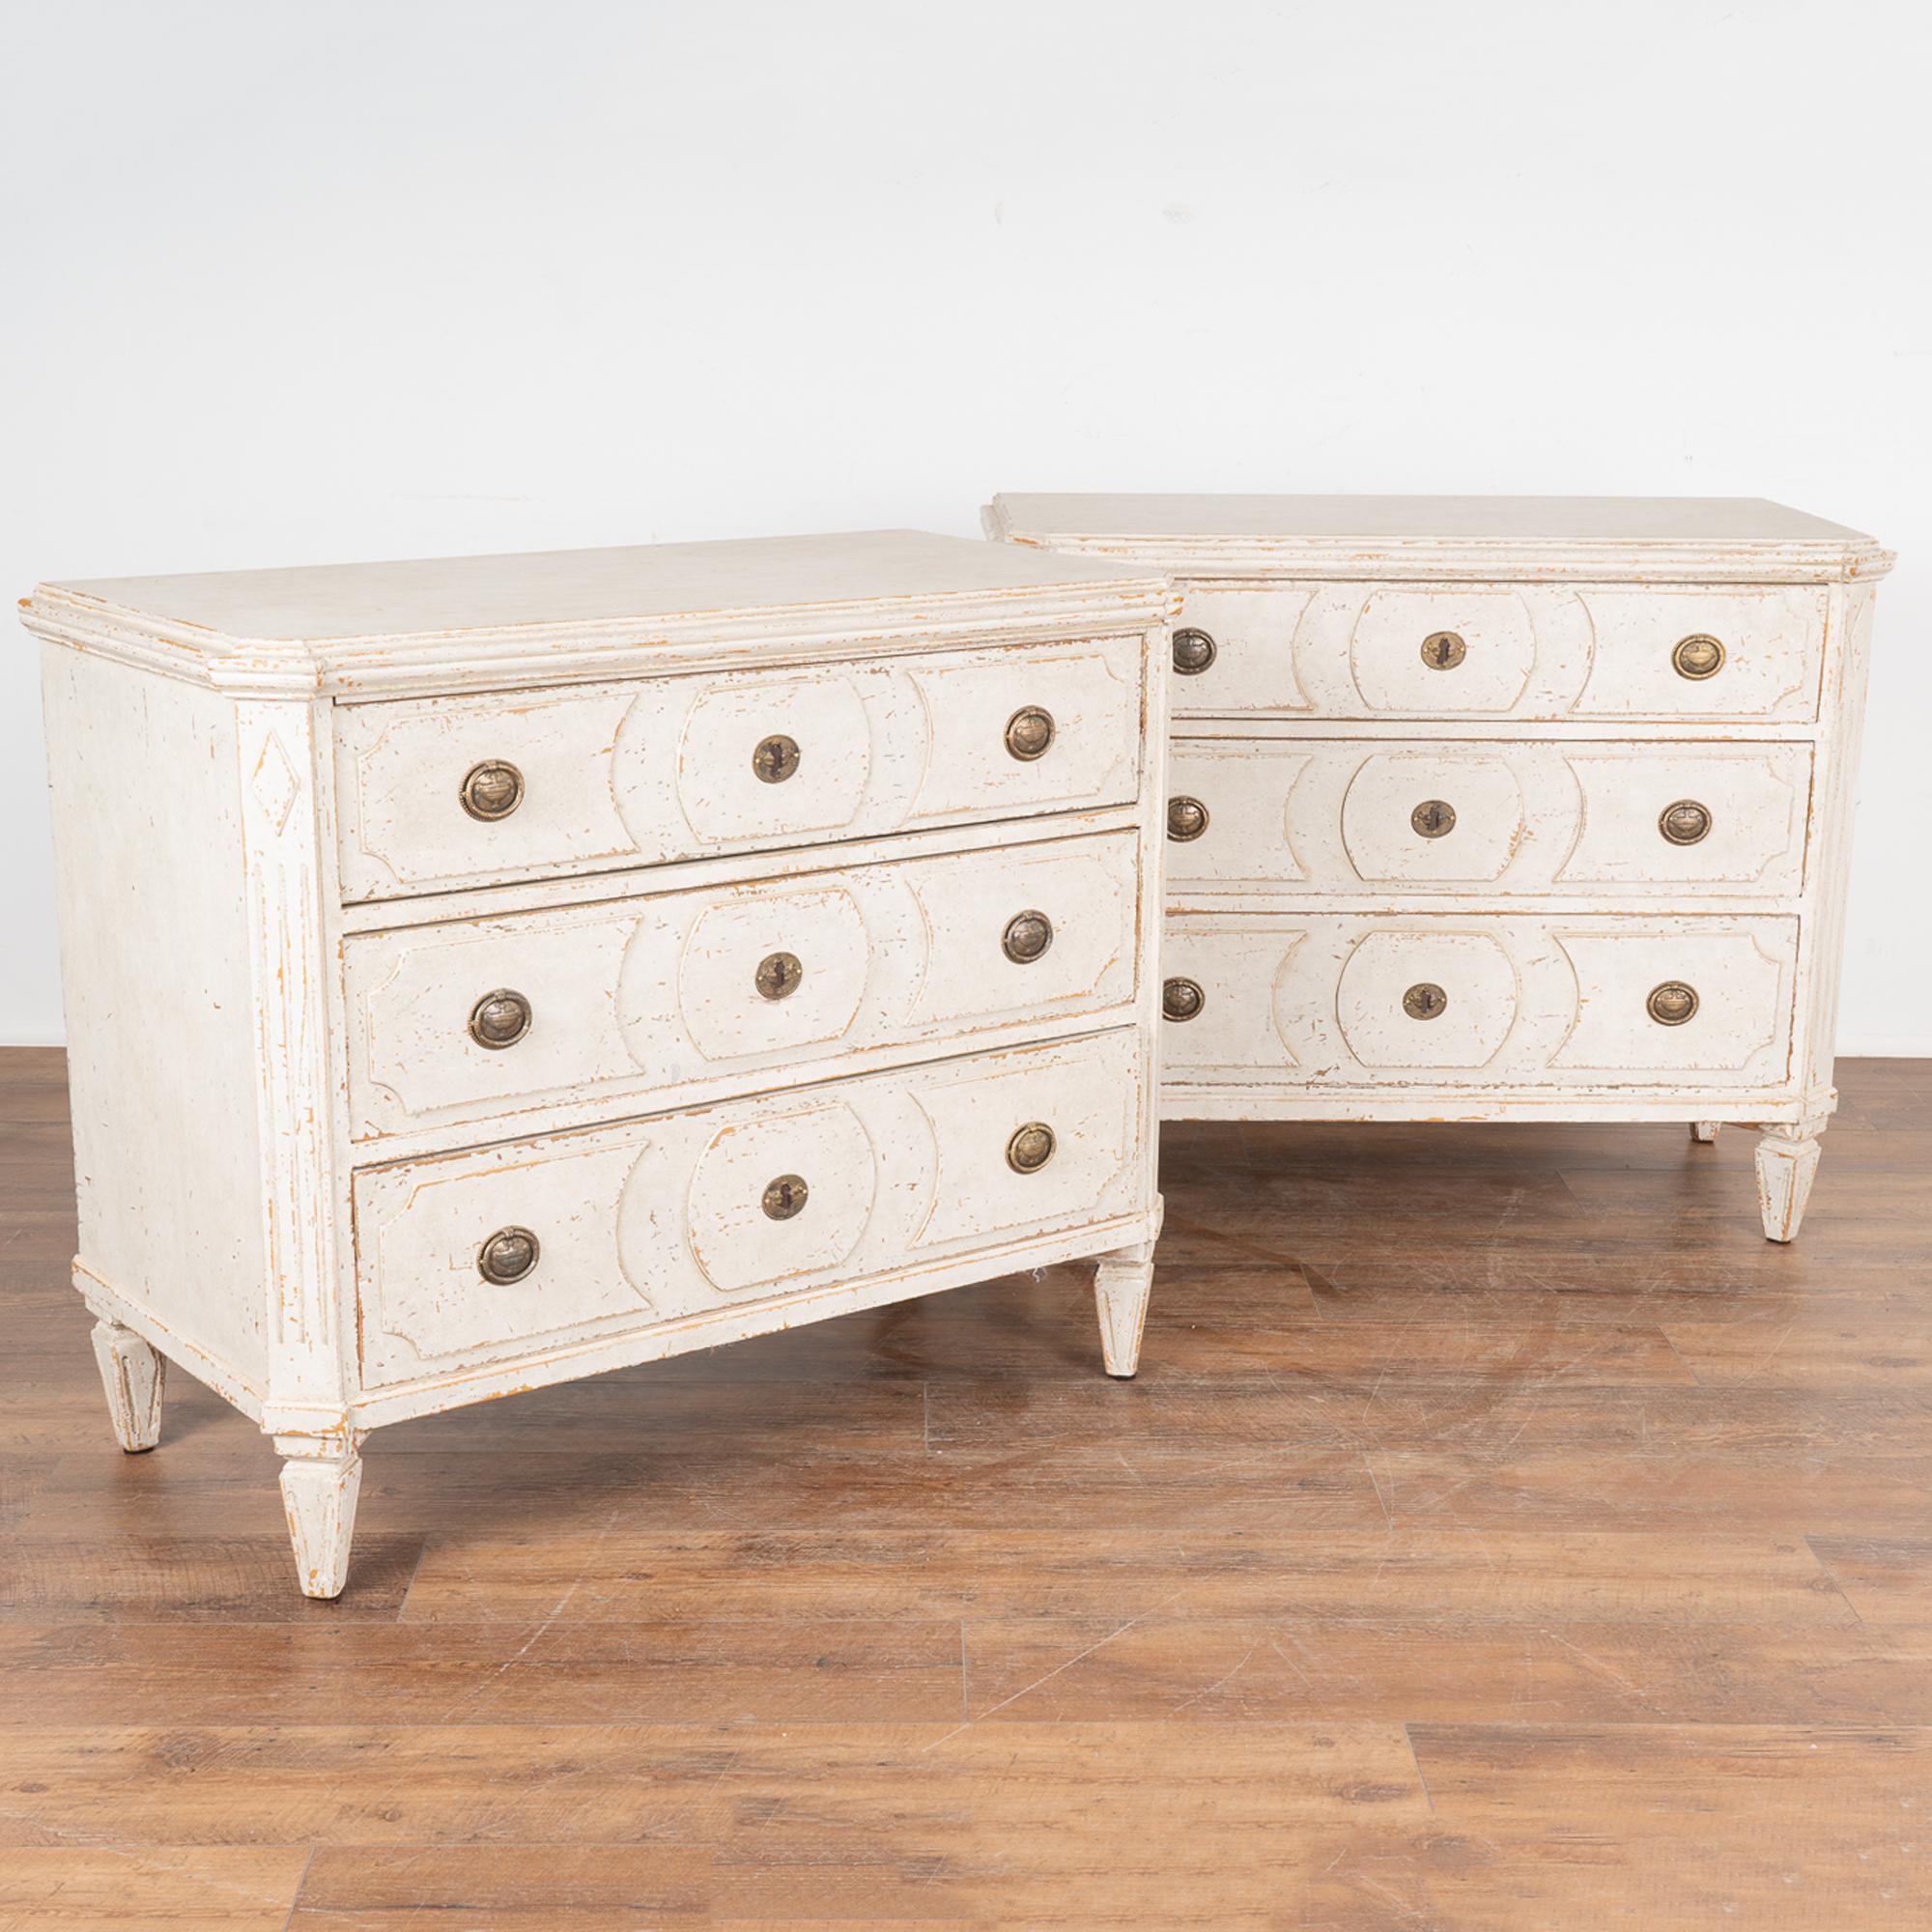 A pair of decorative Gustavian pine chest of drawers painted in shades of white, fitting their Swedish origin.
Canted fluted side posts with upper carved diamond medallion, raised carved panels along the three drawers, all setting on four tapered